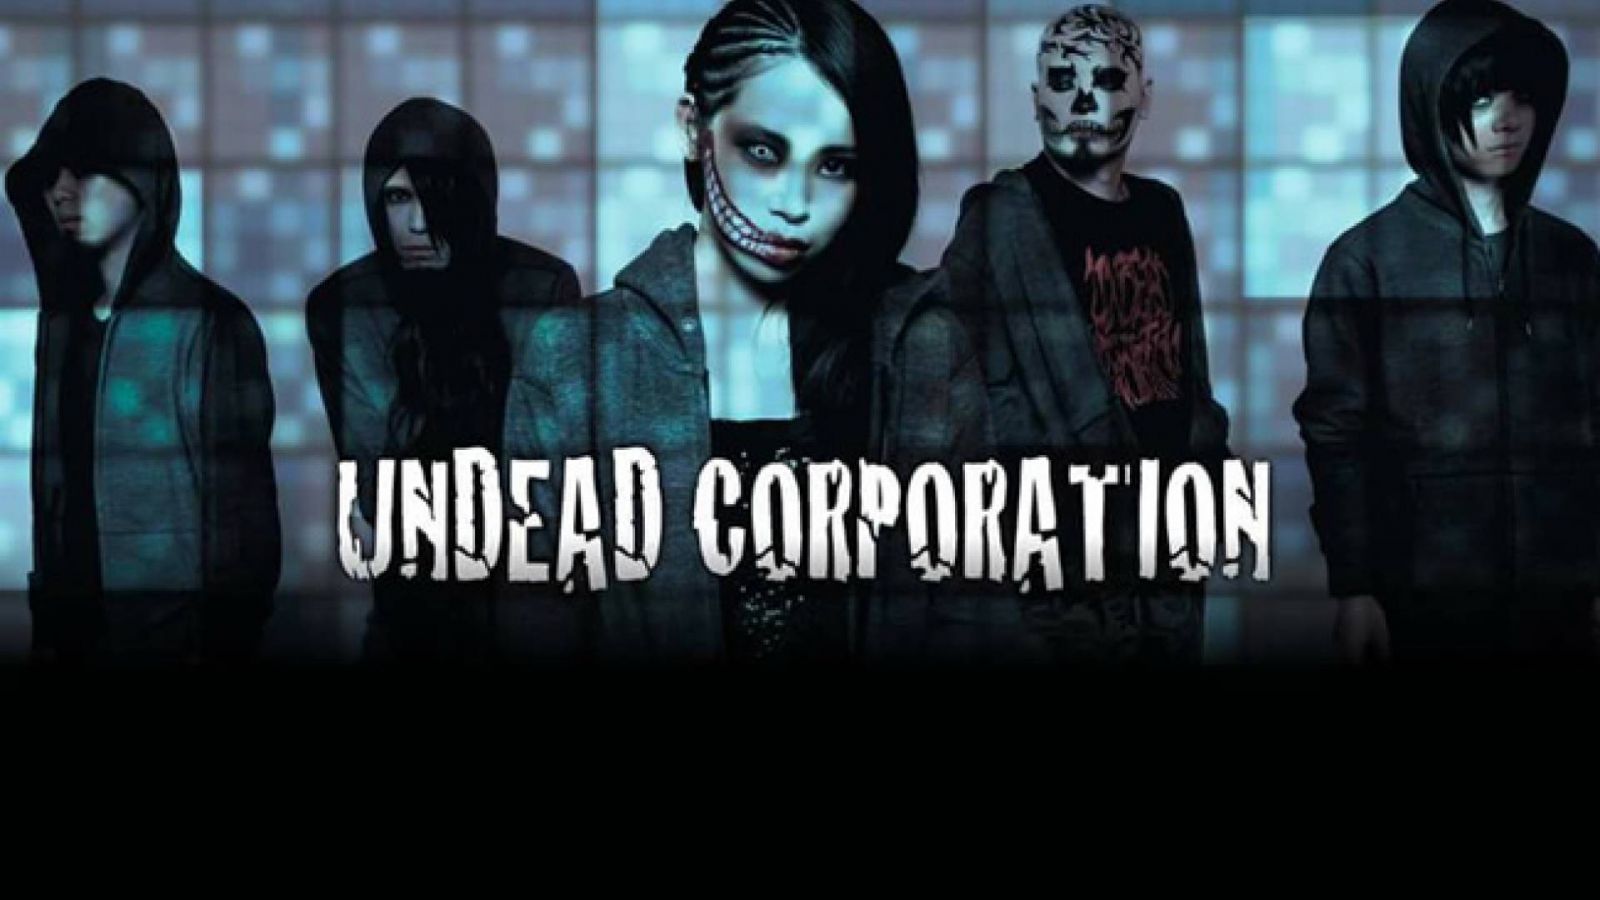 UNDEAD CORPORATION - Tsuwamono © 2015 UNDEAD CORPORATION. All rights reserved.